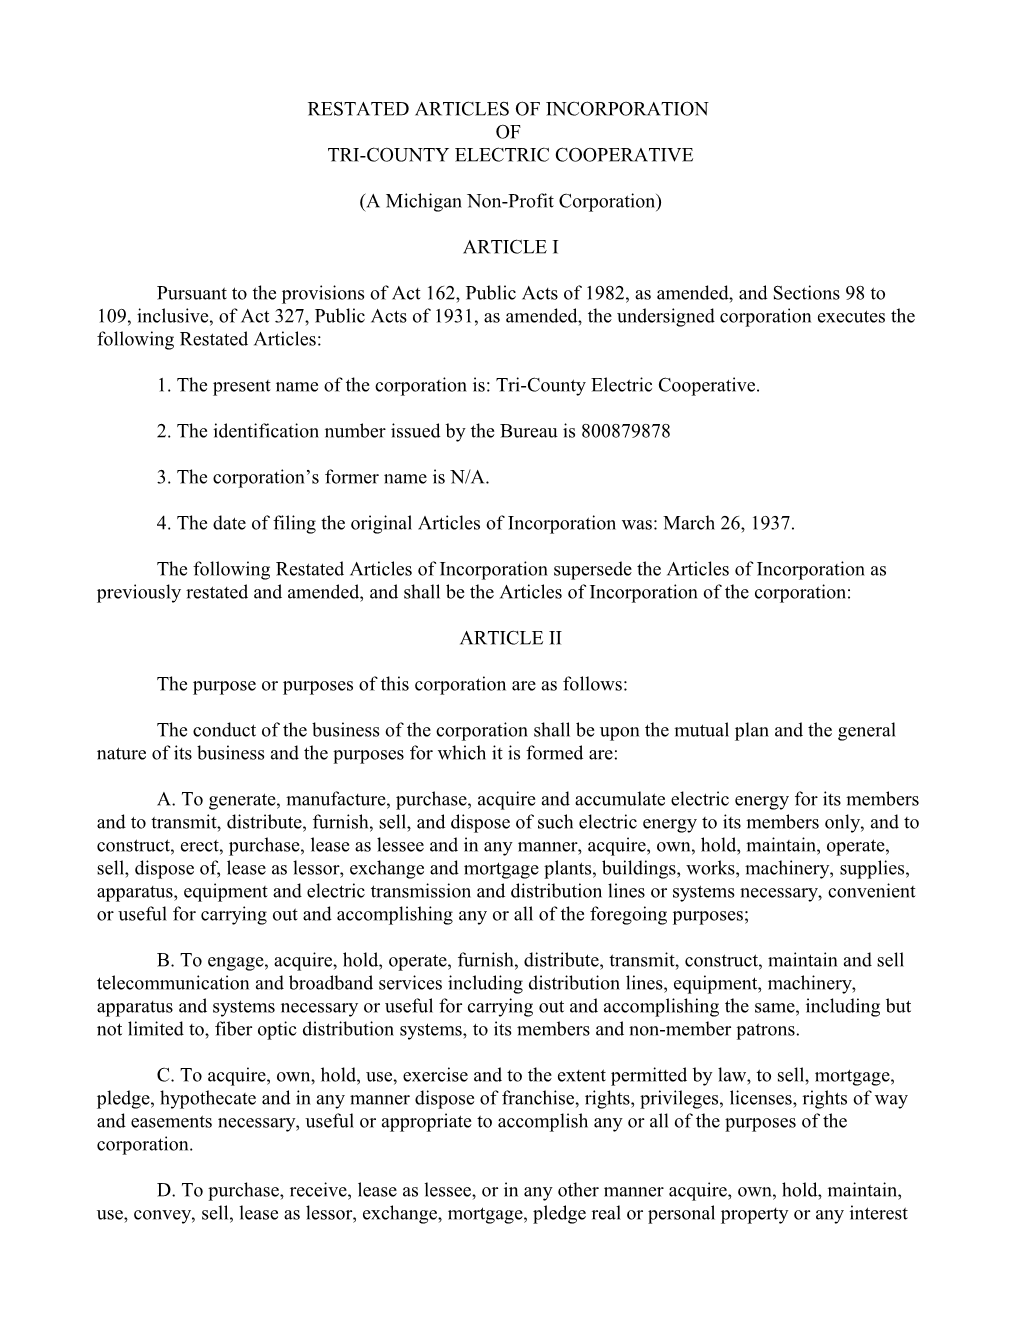 Articles of Incorporation of Tri-County Electric Ooperative